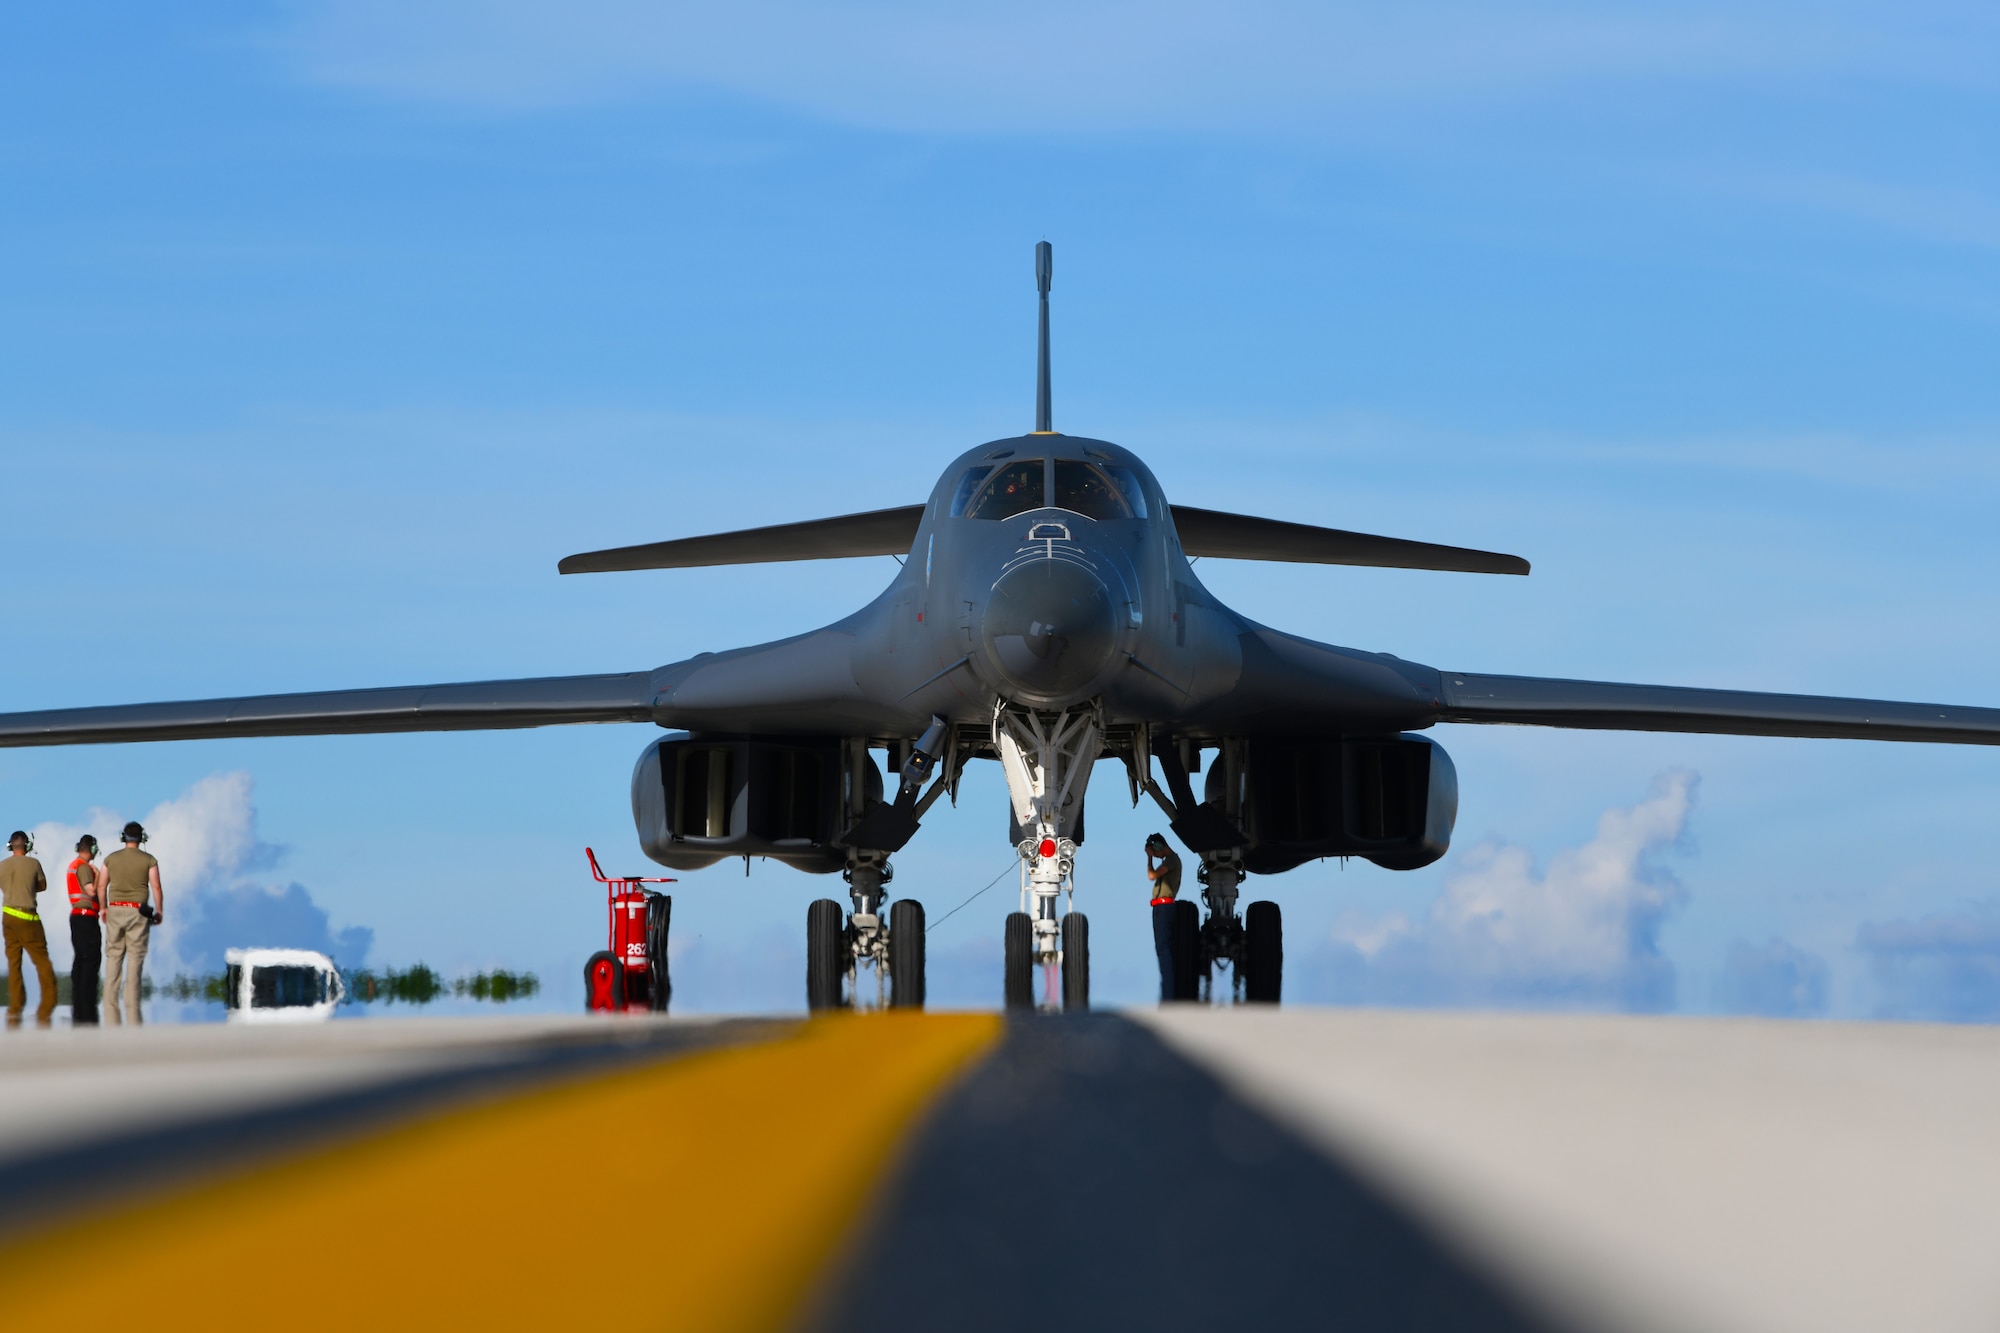 A B-1B Lancer assigned to the 34th Bomb Squadron, Ellsworth Air Force Base, S.D., taxis at Andersen AFB, Guam, after arriving for a Bomber Task Force deployment, Sept. 10, 2020. Approximately 200 Airmen and four B-1s assigned to the 28th Bomb Wing at Ellsworth AFB, South Dakota, deployed to the Pacific in support of the Bomber Task Force employment model. The BTF is deployed to Andersen AFB to support Pacific Air Forces’ training efforts with allies, partners and joint forces; and strategic deterrence
missions to reinforce the rules-based order in the Indo-Pacific region. (U.S. Air Force photo by Staff Sgt. Nicolas Z. Erwin)